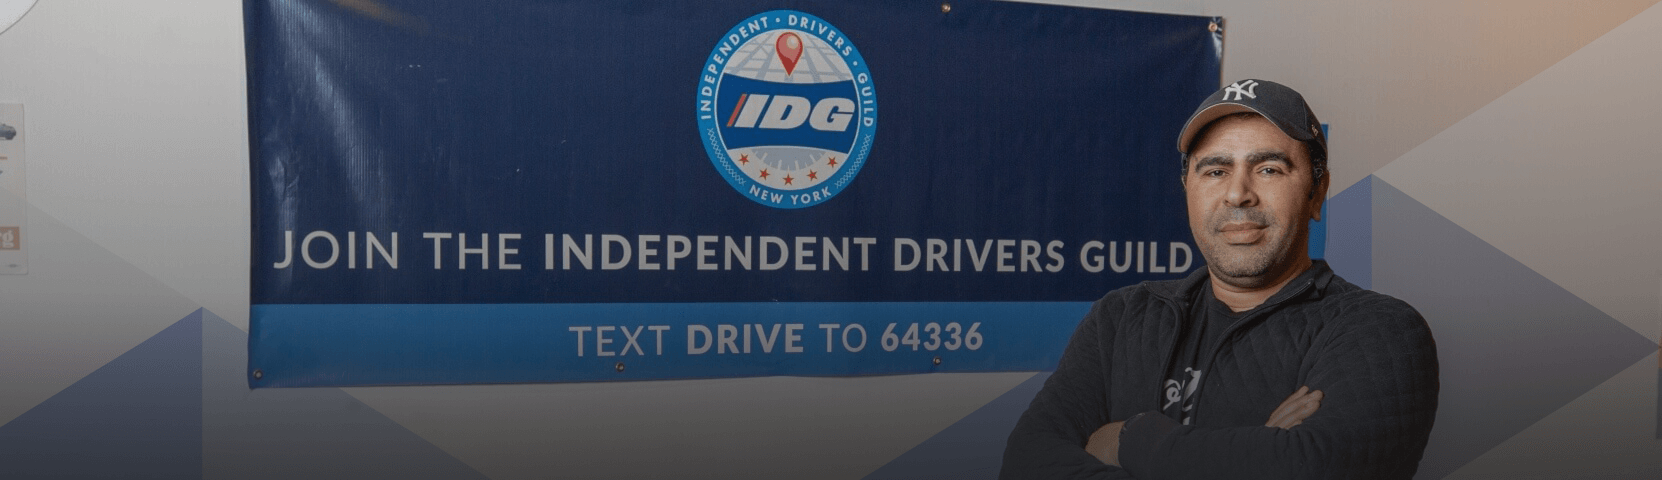 Independent Drivers Guild Driver stands in front of banner